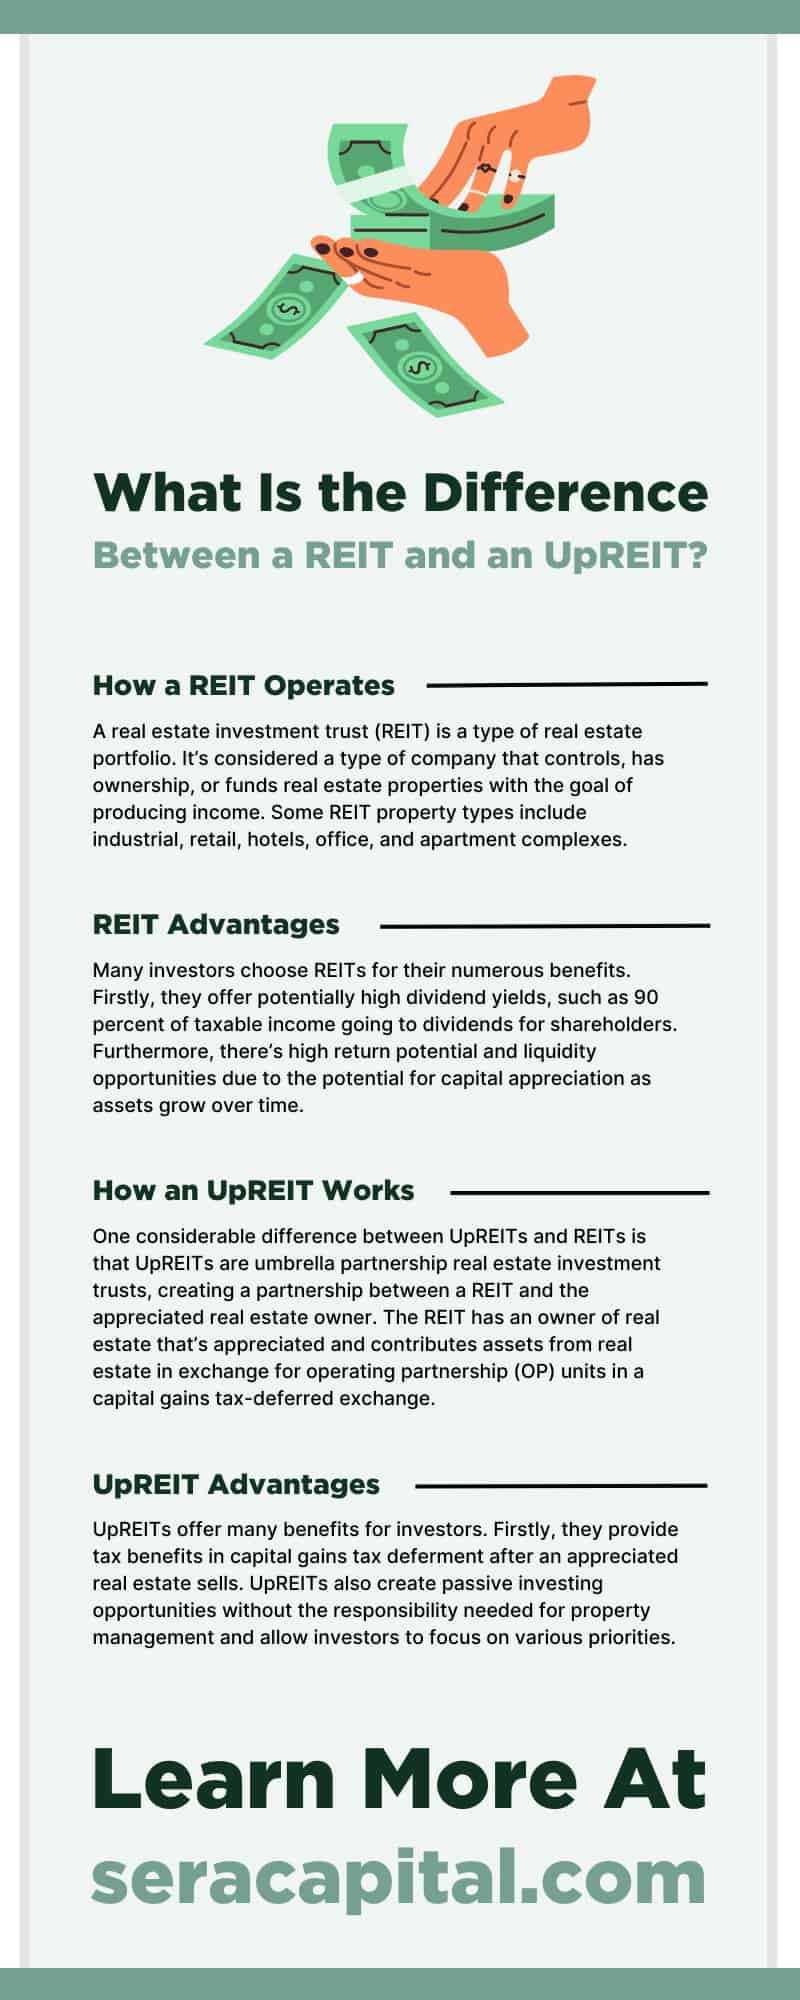 What Is the Difference Between a REIT and an UpREIT?